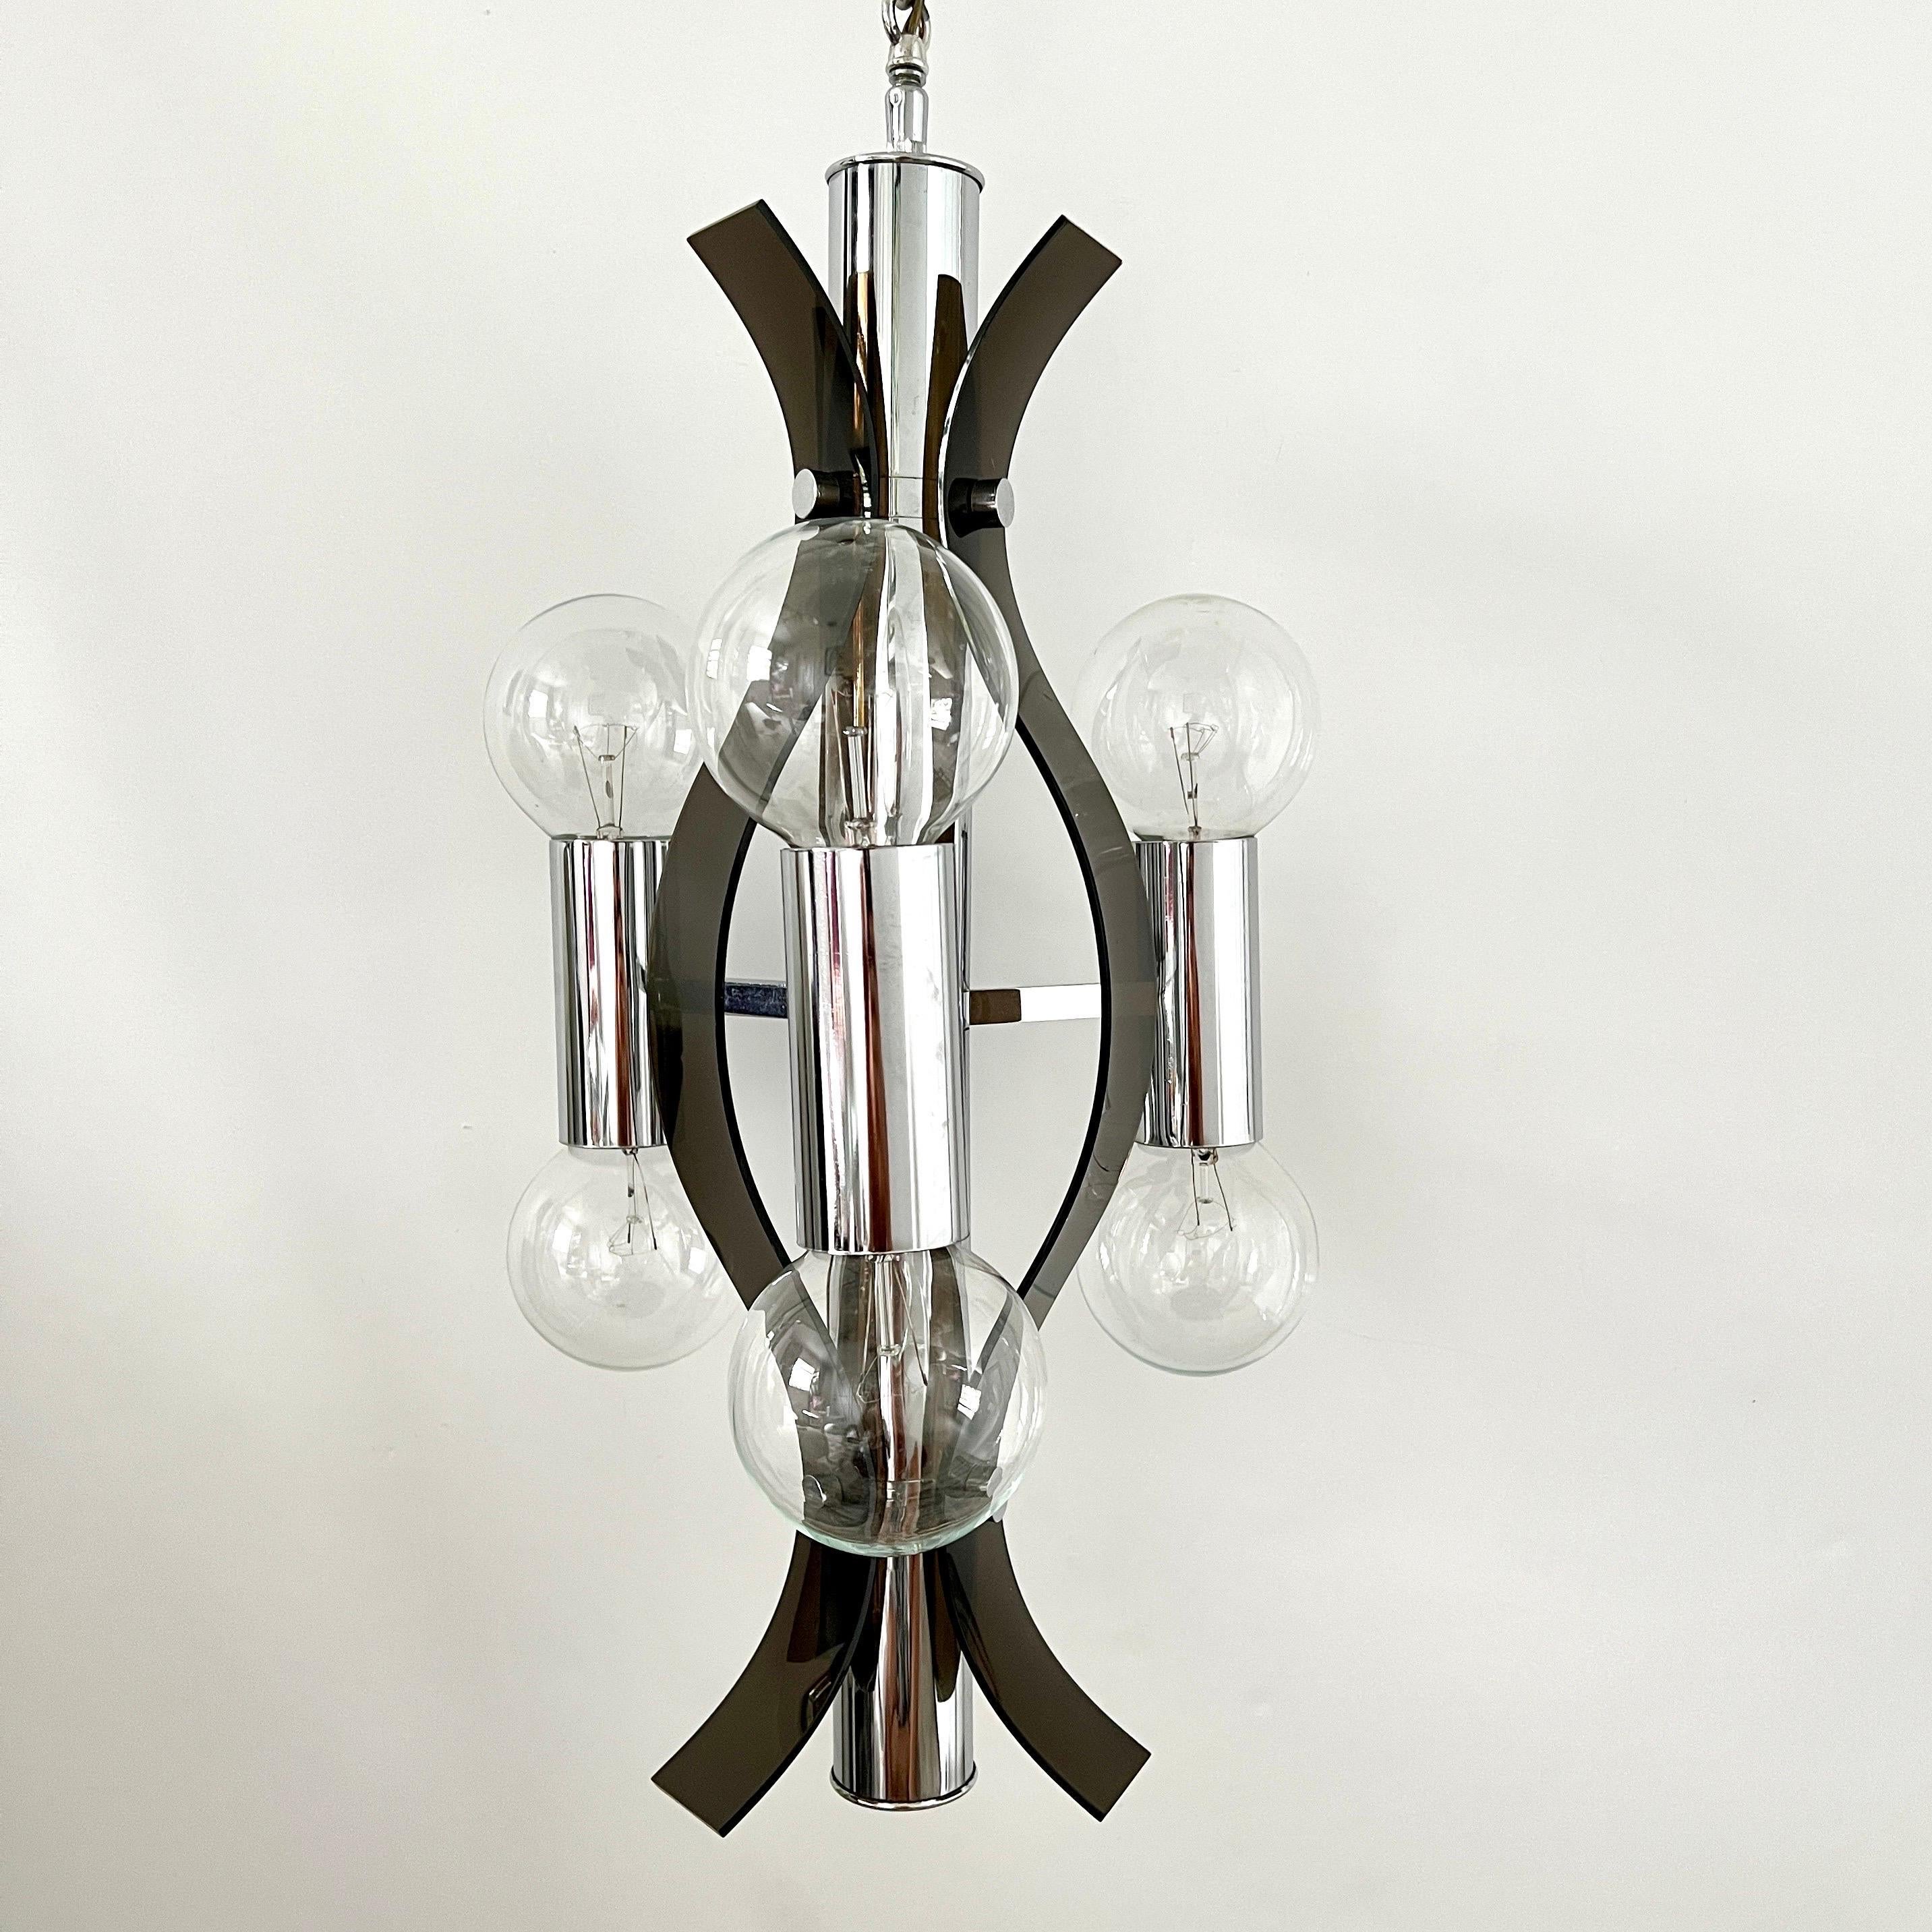 Sculptural Chandelier in Chrome and Smoked Lucite, Robert Sonneman, c. 1970's For Sale 3